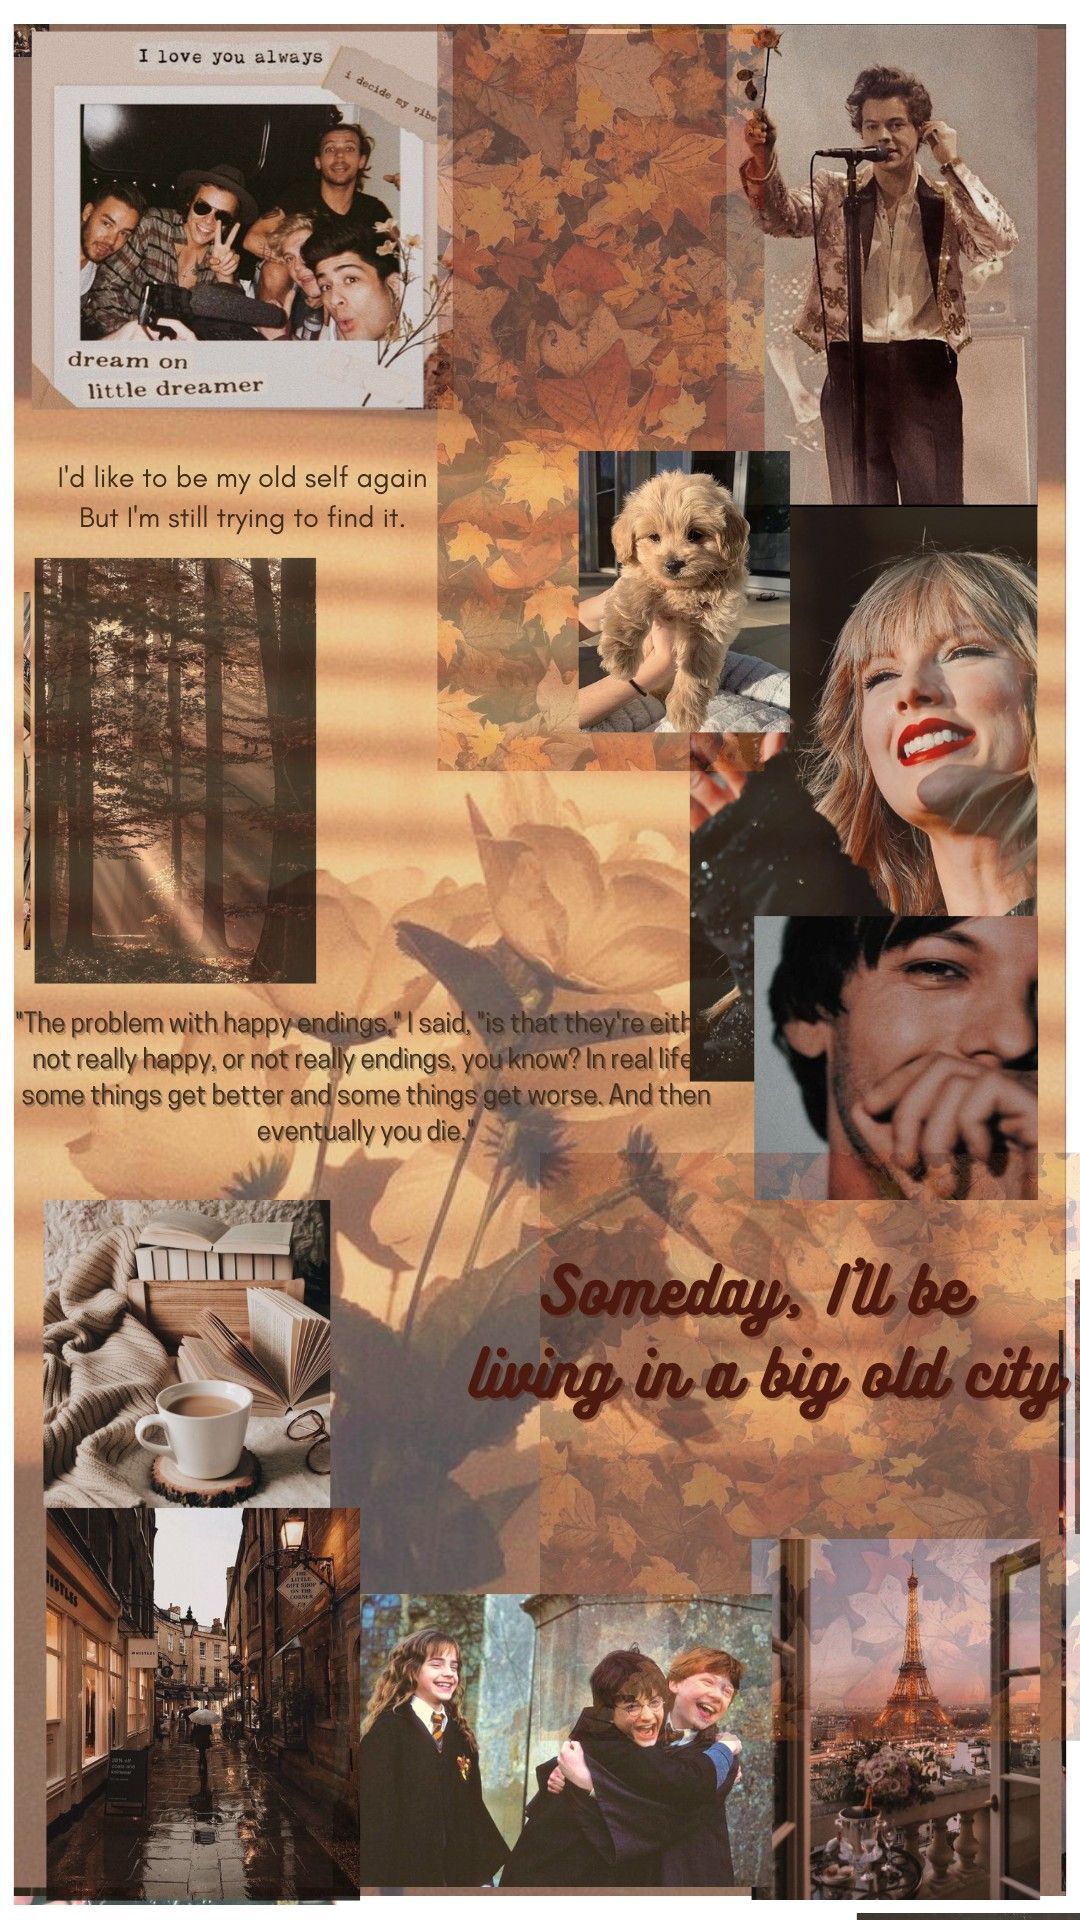 Taylor Swift, One direction, brown aesthetic wallpaper. The dreamers, Wallpaper, Real life